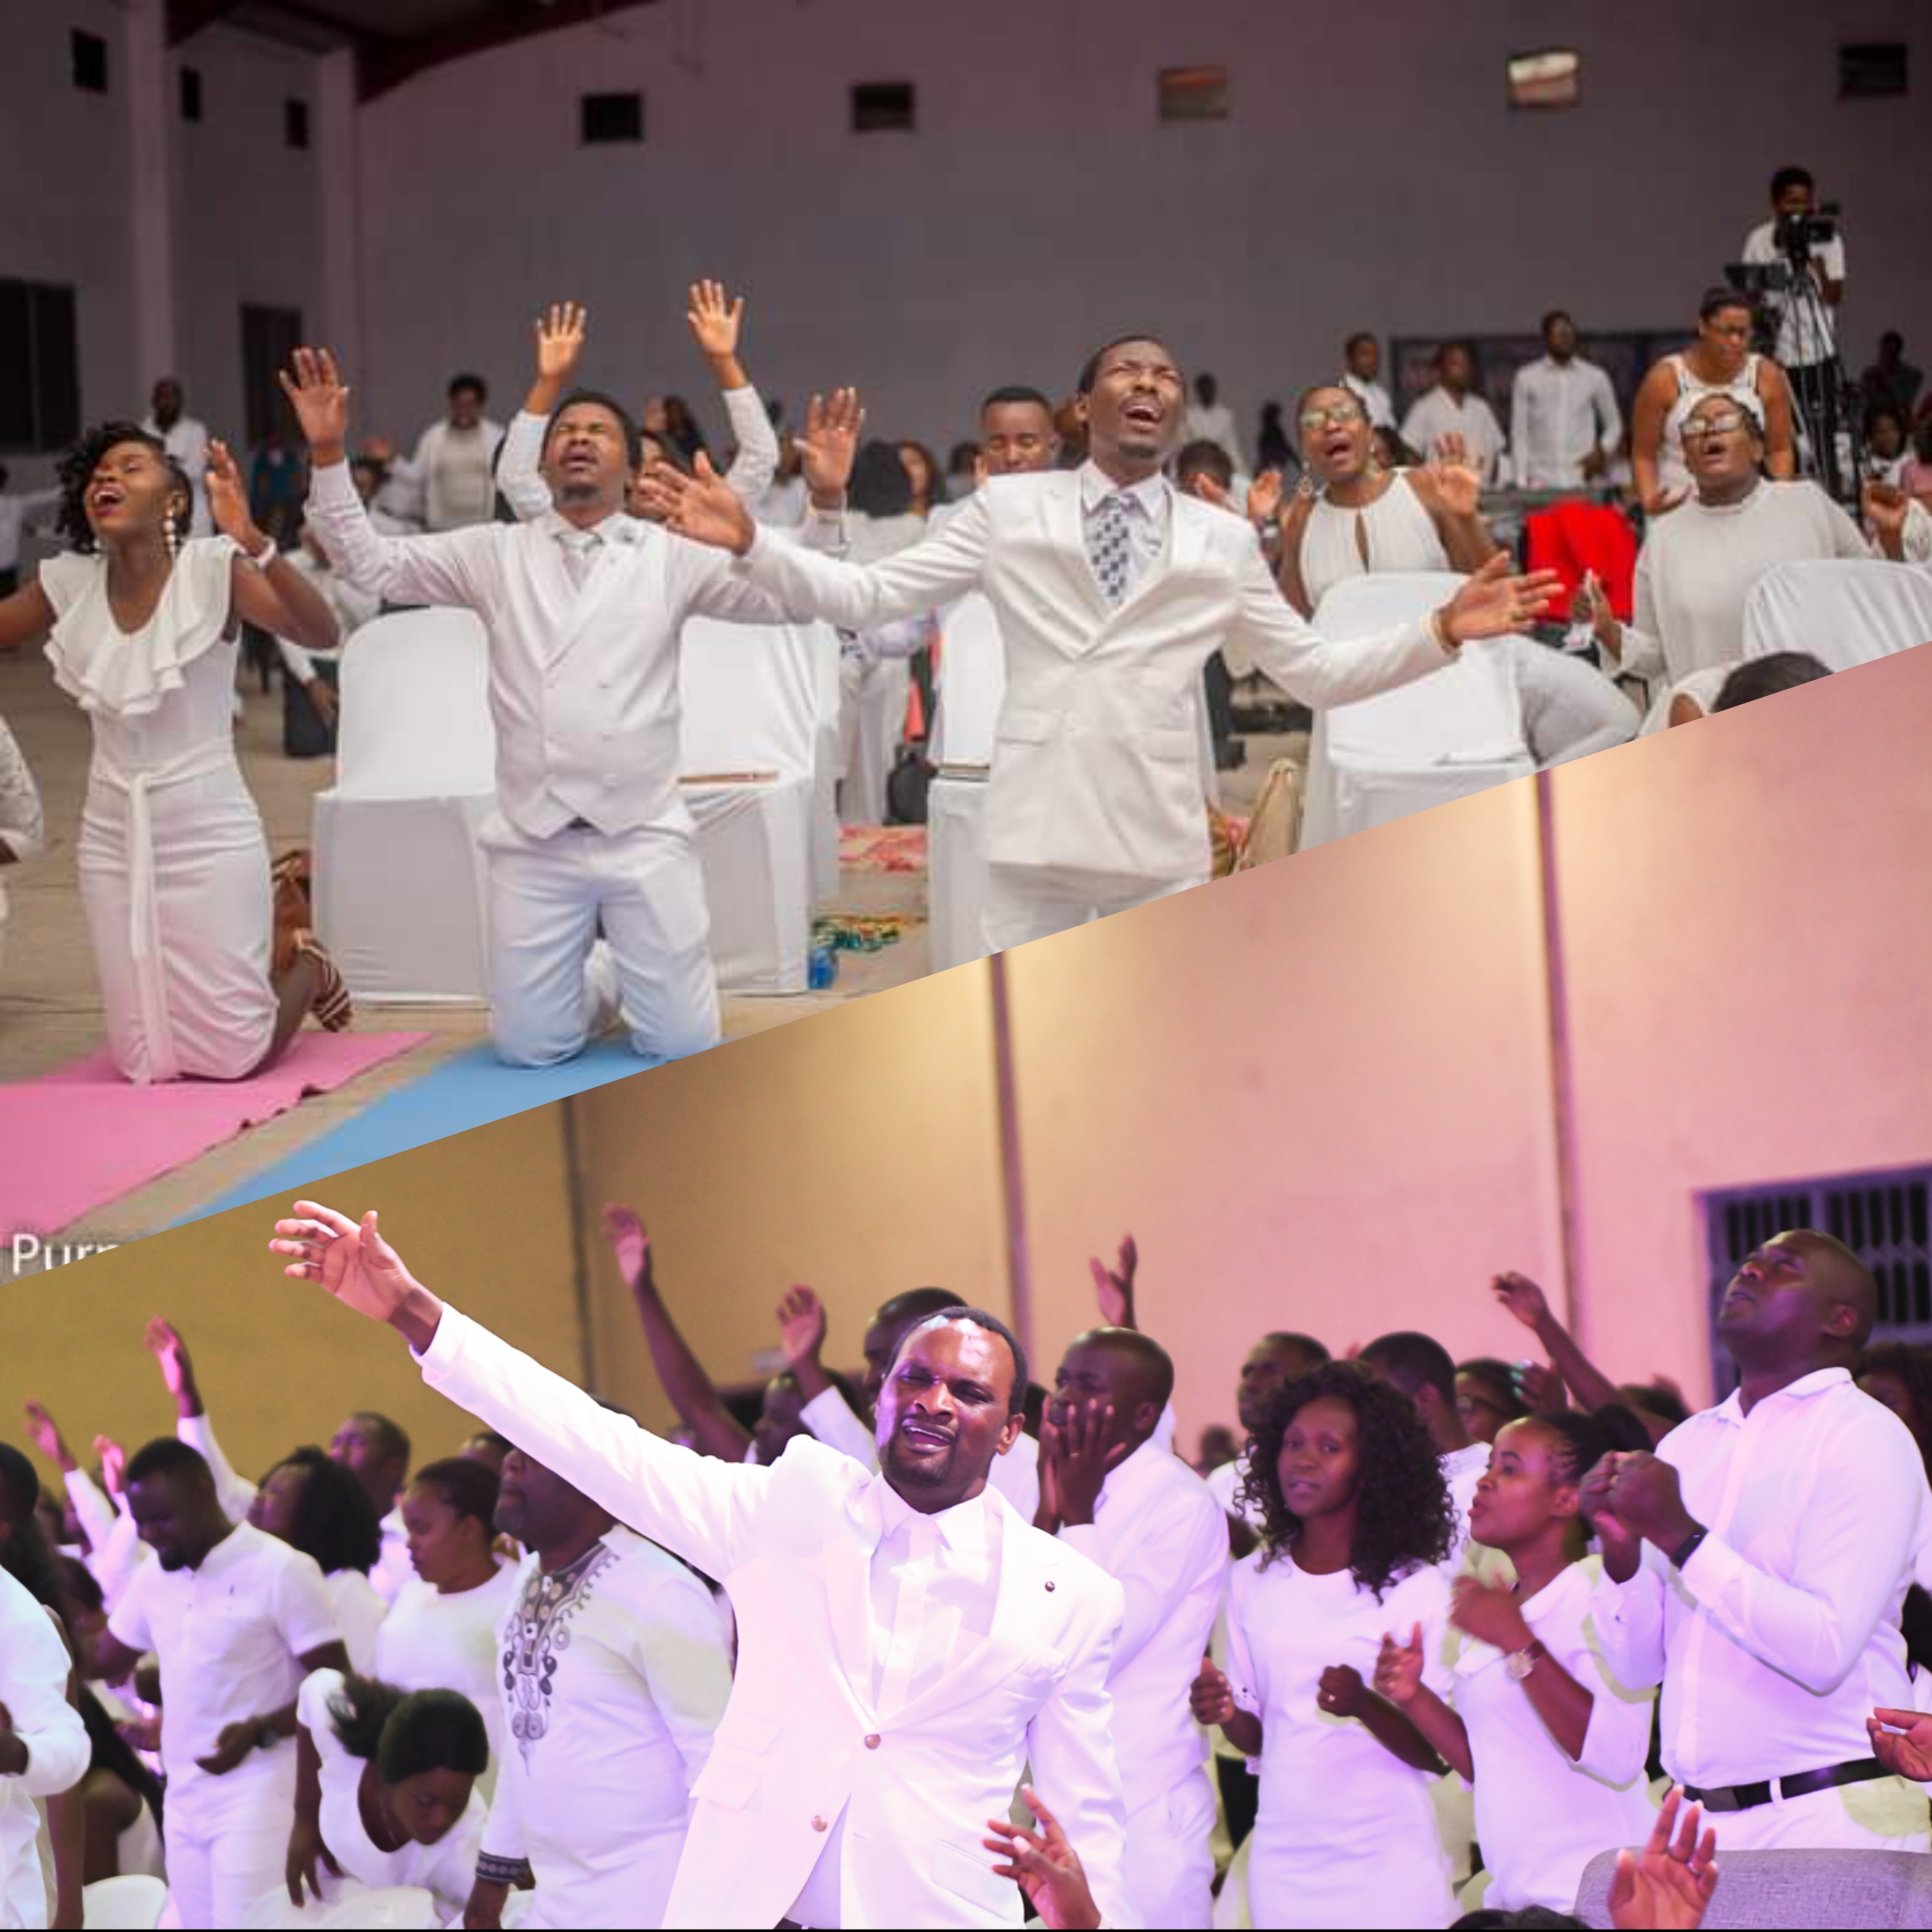  Weekend Festivities: ALL White Worship Encounter at RFP Ministries and Fountain of Victory Church International